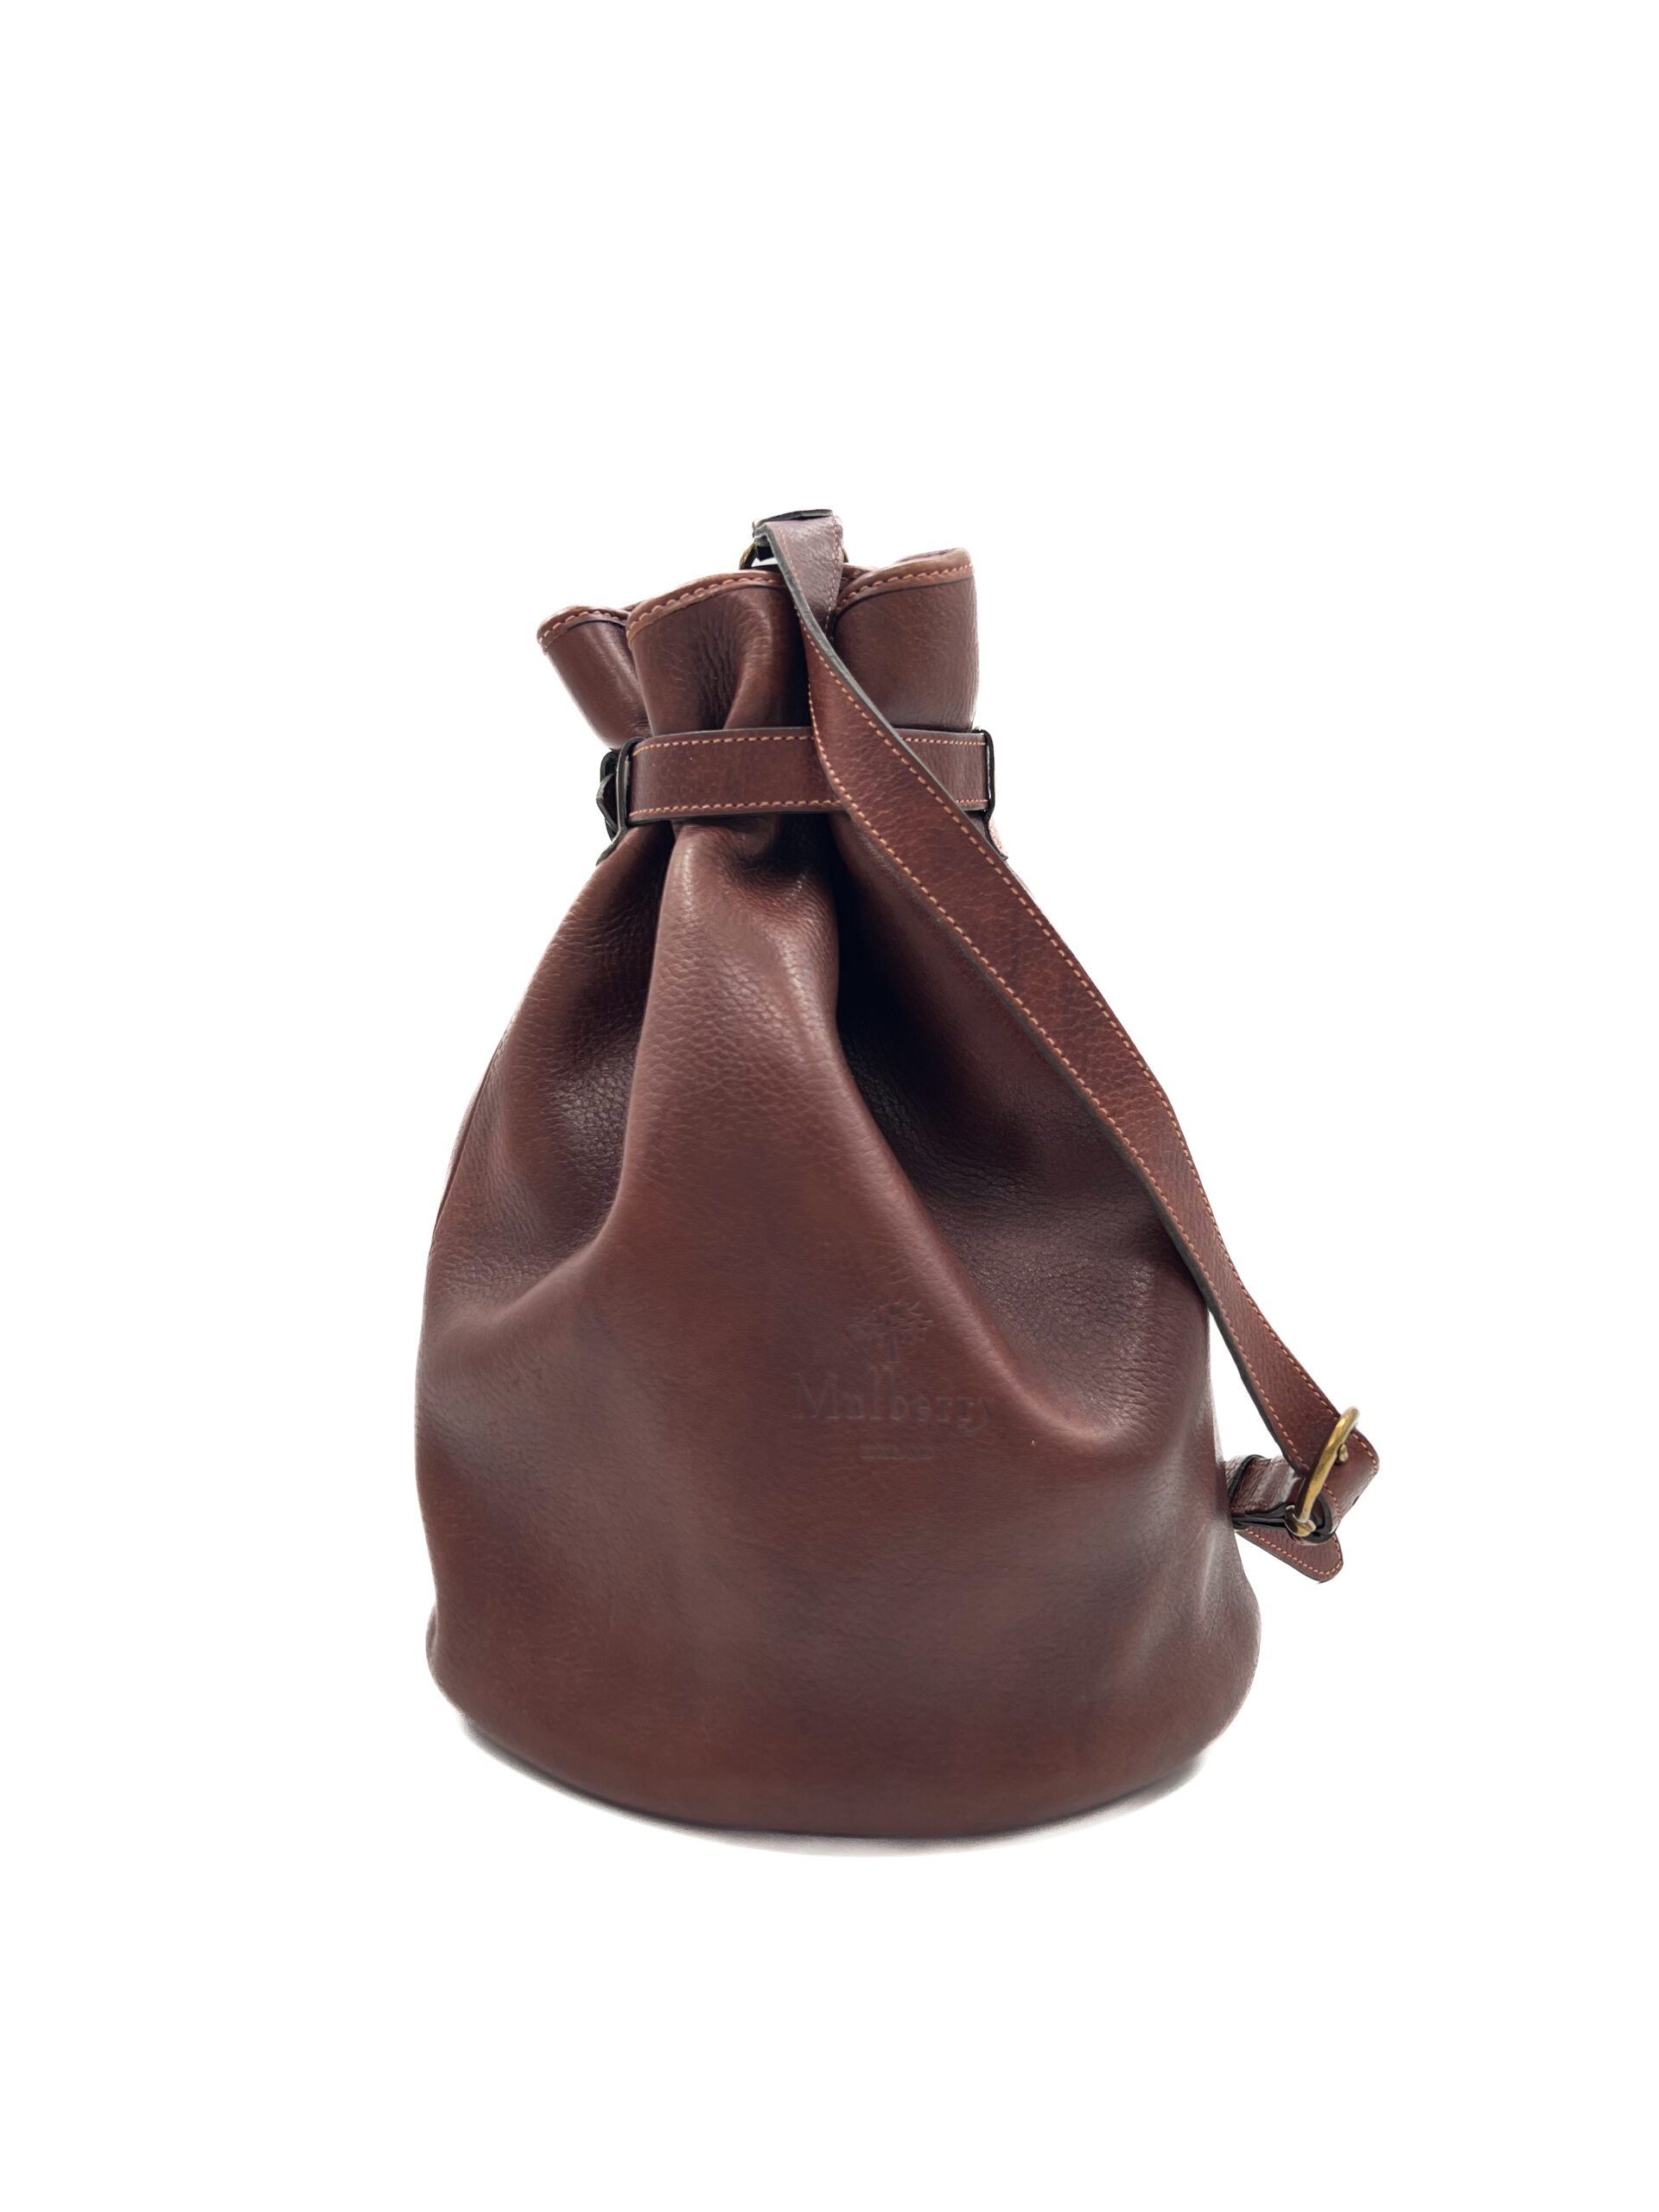 Mulberry Brown Bucket Bag by Ho